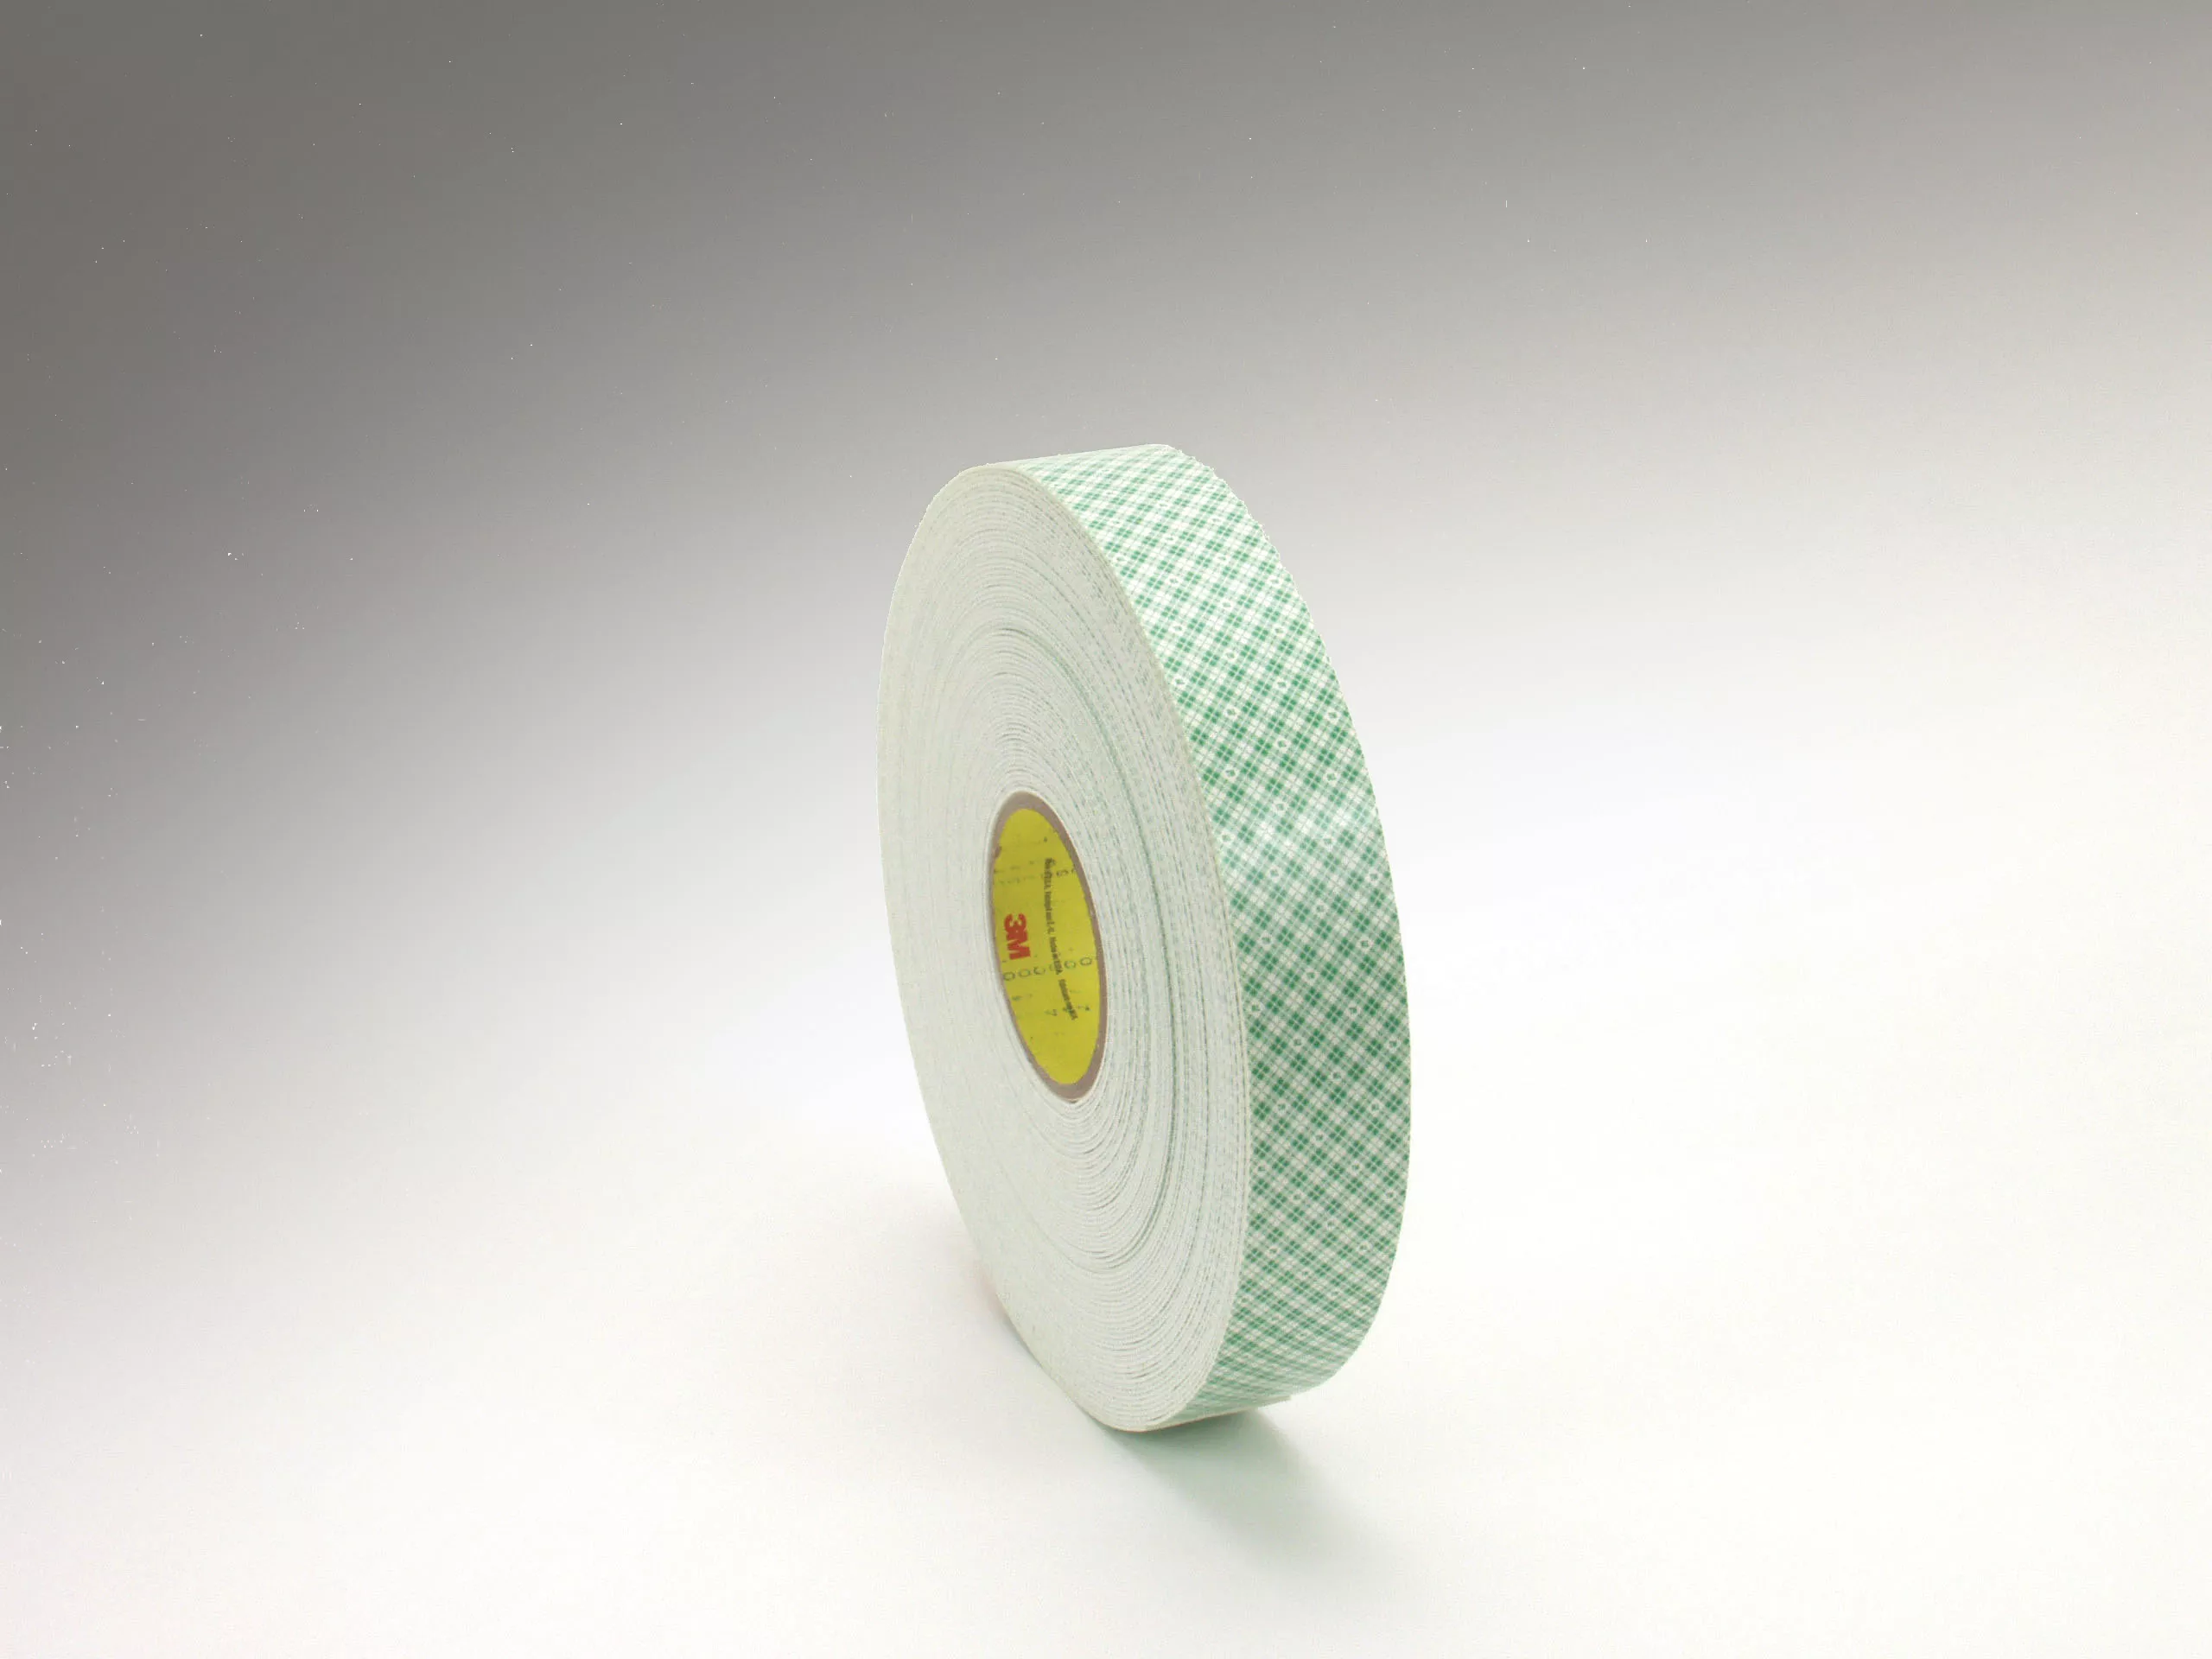 3M™ Double Coated Urethane Foam Tape 4016, Off White, 1/2 in x 36 yd, 62
mil, 18 Roll/Case